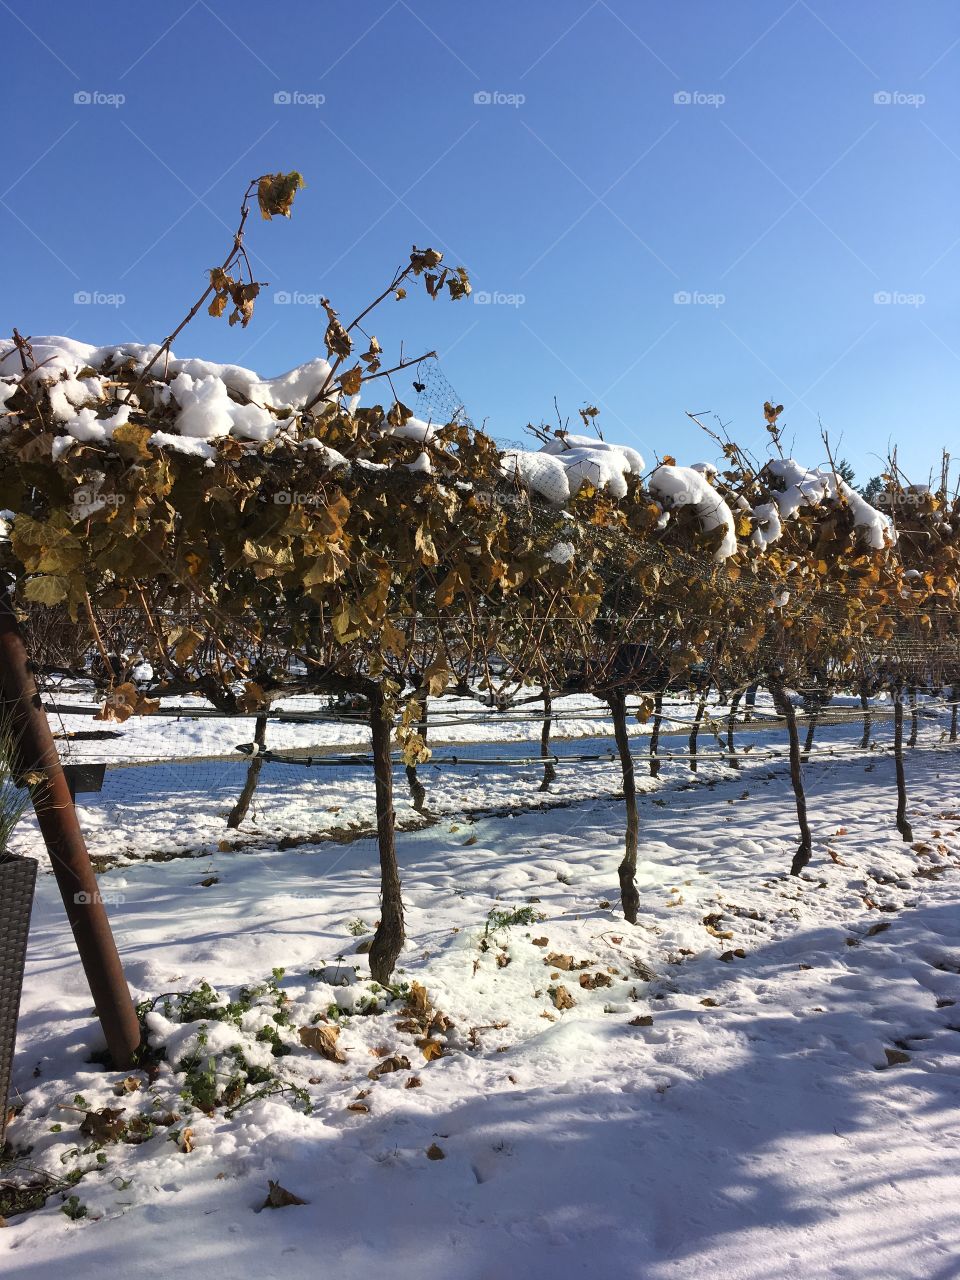 Vines in the winter